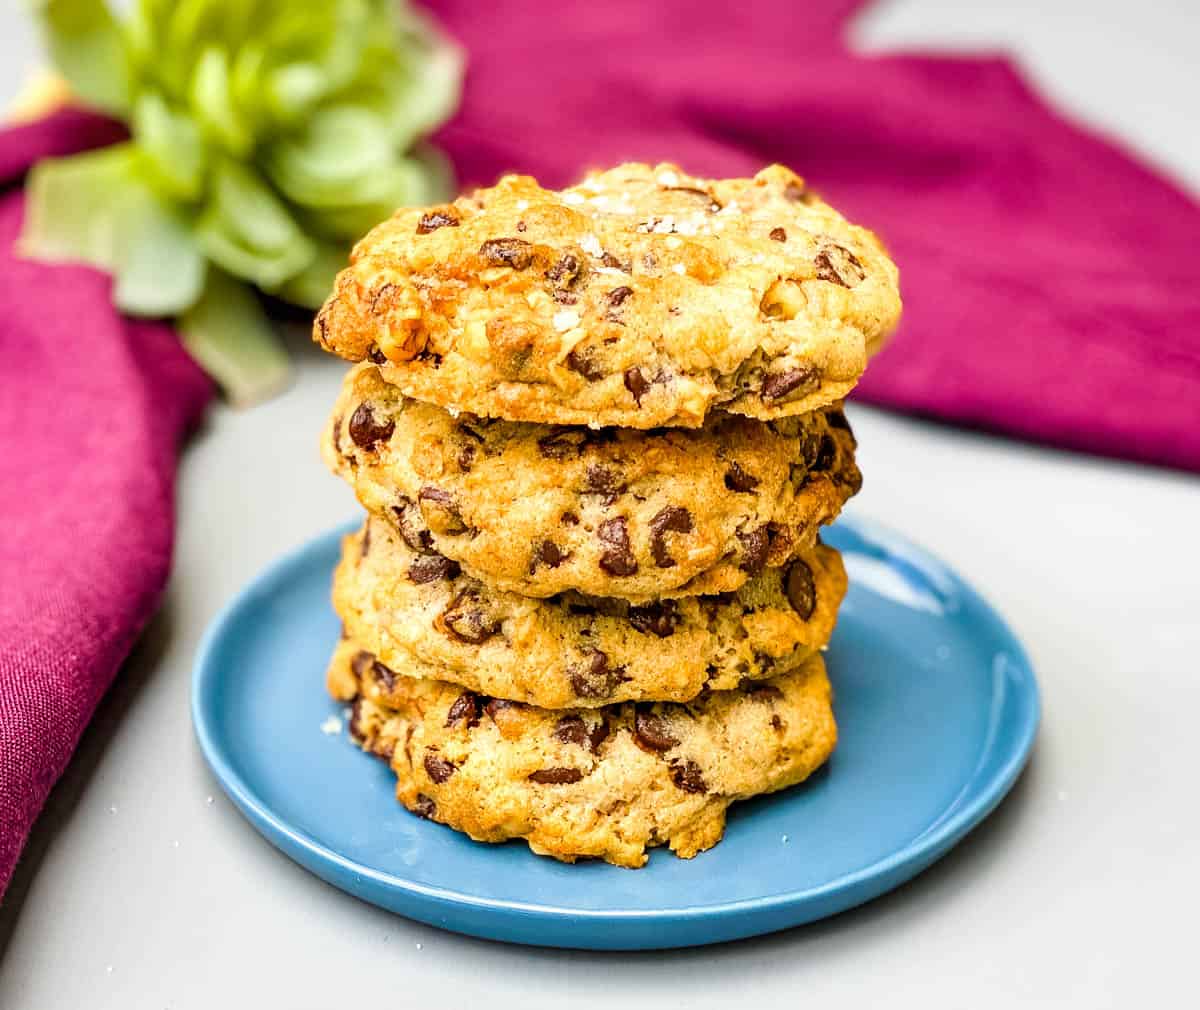 https://www.staysnatched.com/wp-content/uploads/2020/05/air-fryer-chocolate-chip-cookies-1.jpg